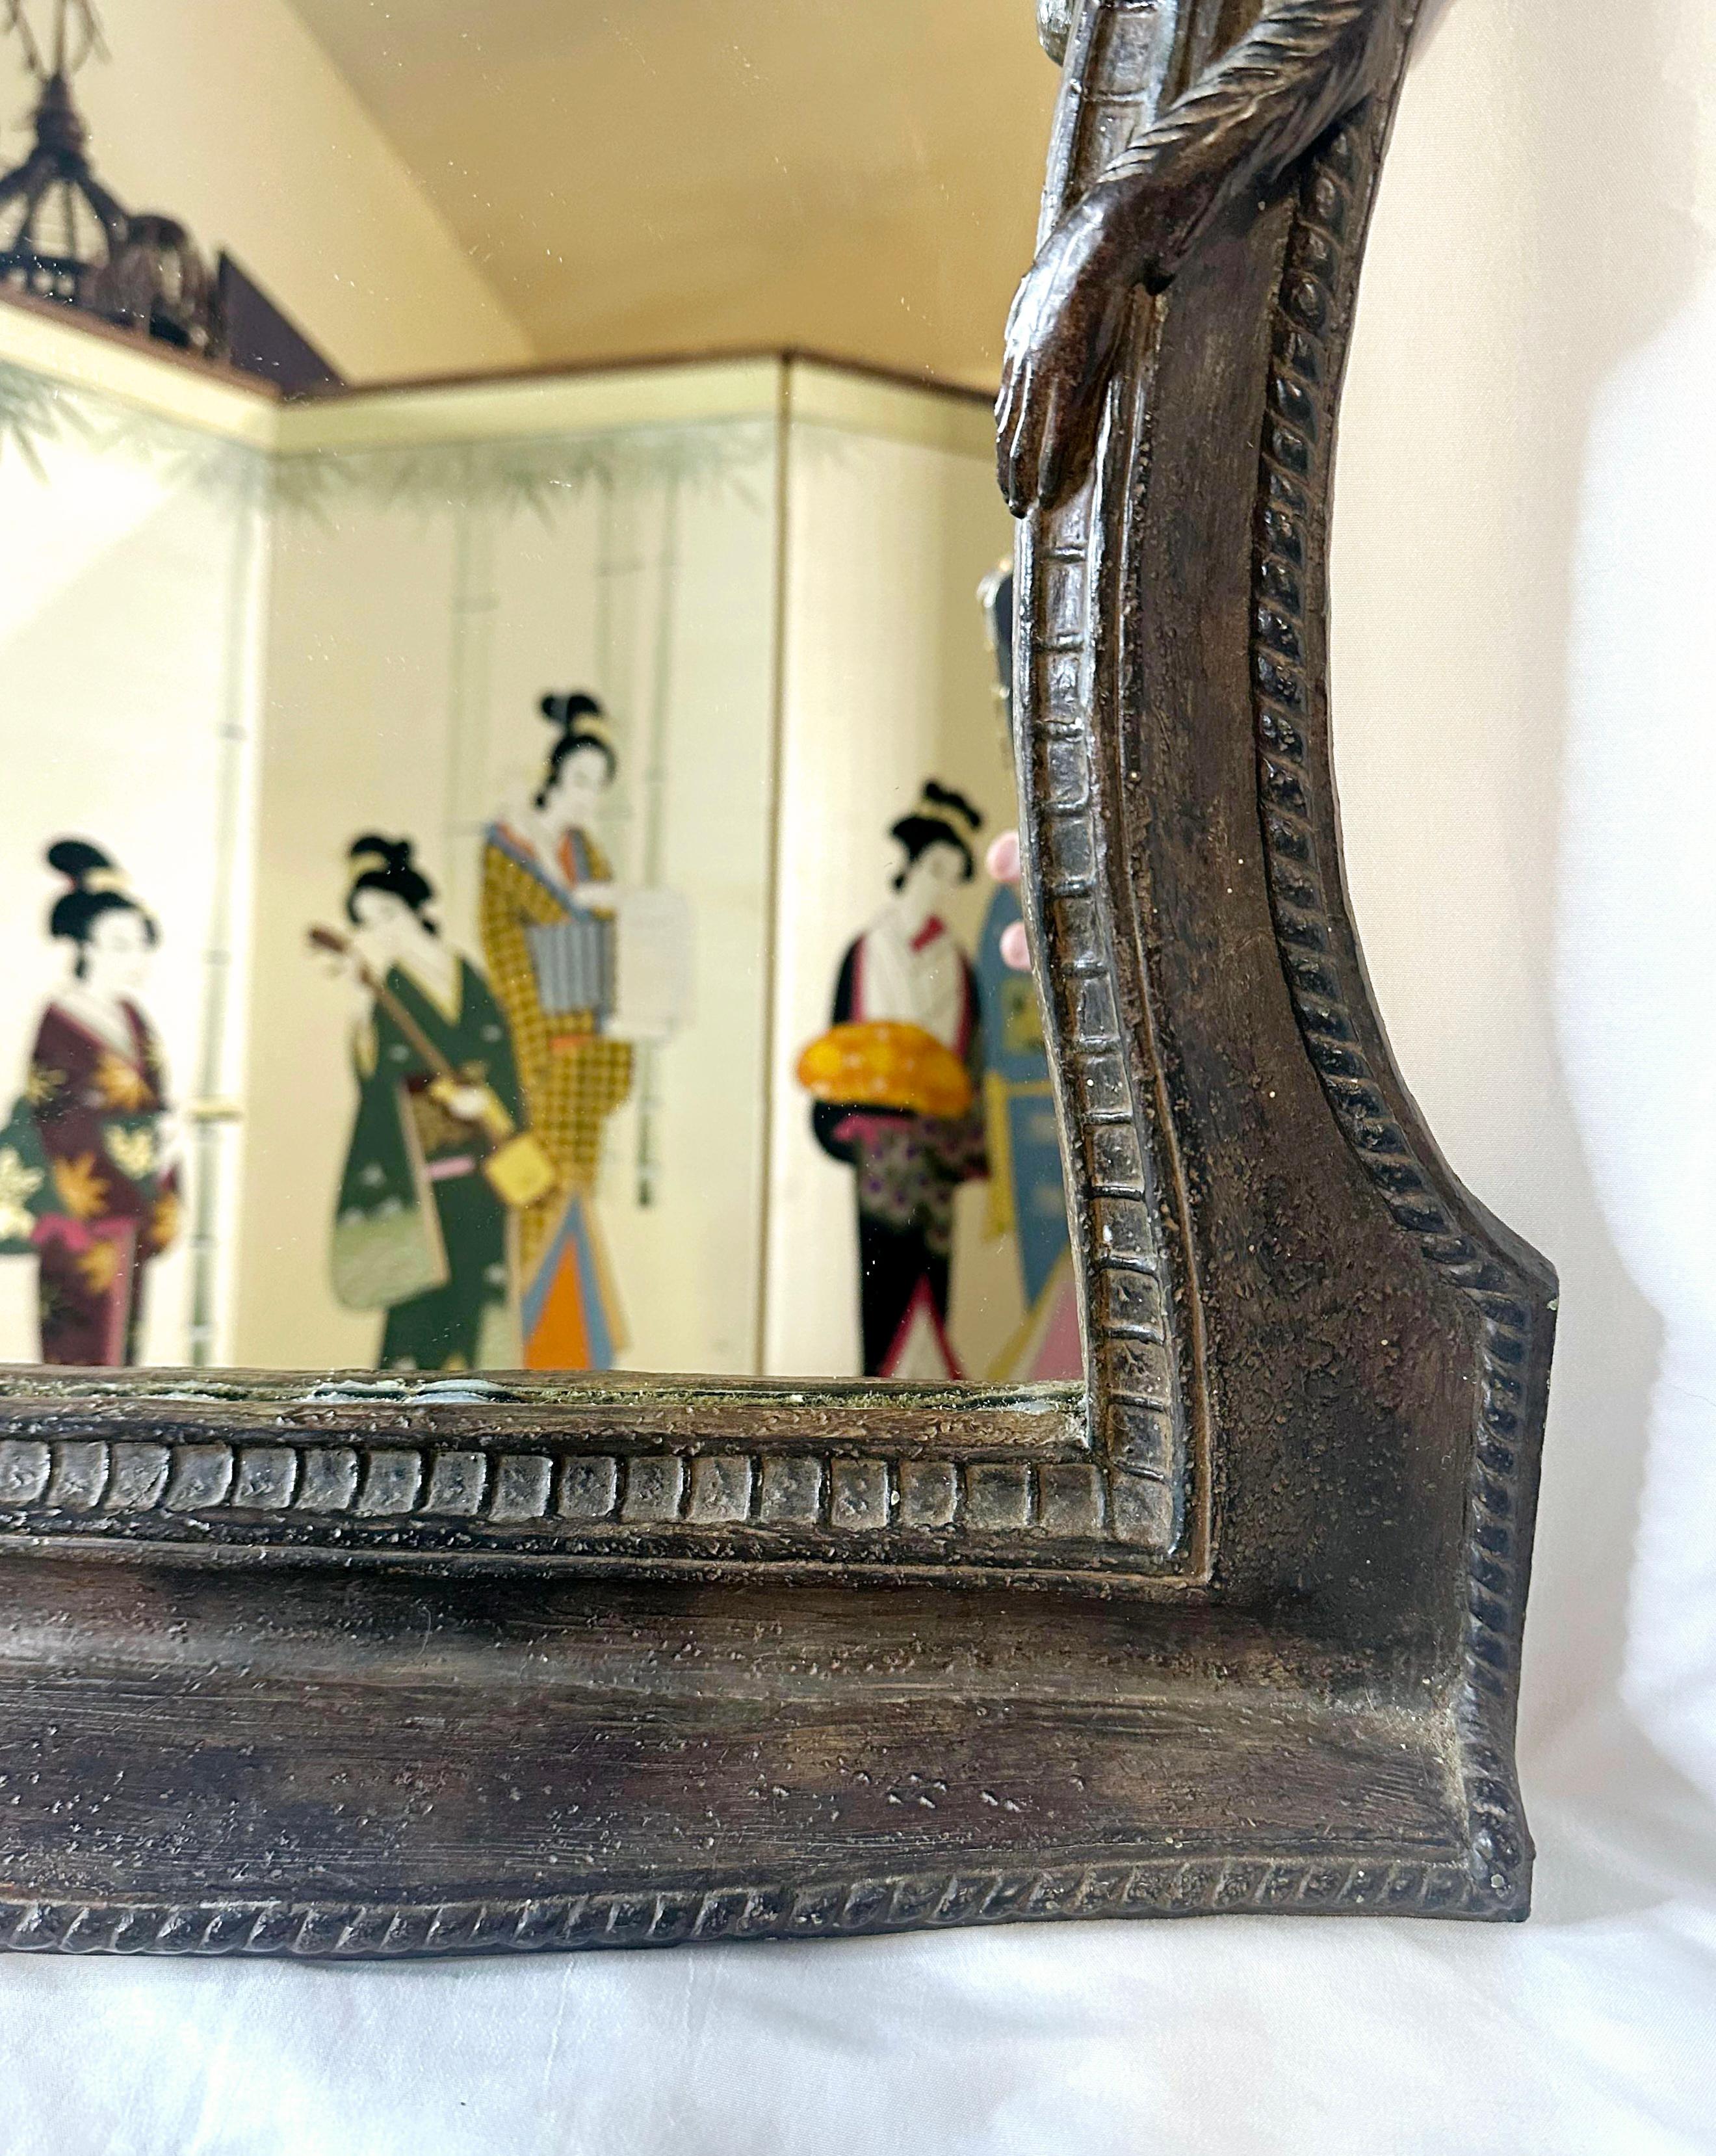 Reminiscent of Earnest Hemingway, Maitland Smith and Tommy Bahama.
Would also be at home in Indiana Jones' study.
Tropical, figurative mirror with two bellhop monkeys.
Small decorative shelf.
Hanging hardware and picture wire installed. 
I think